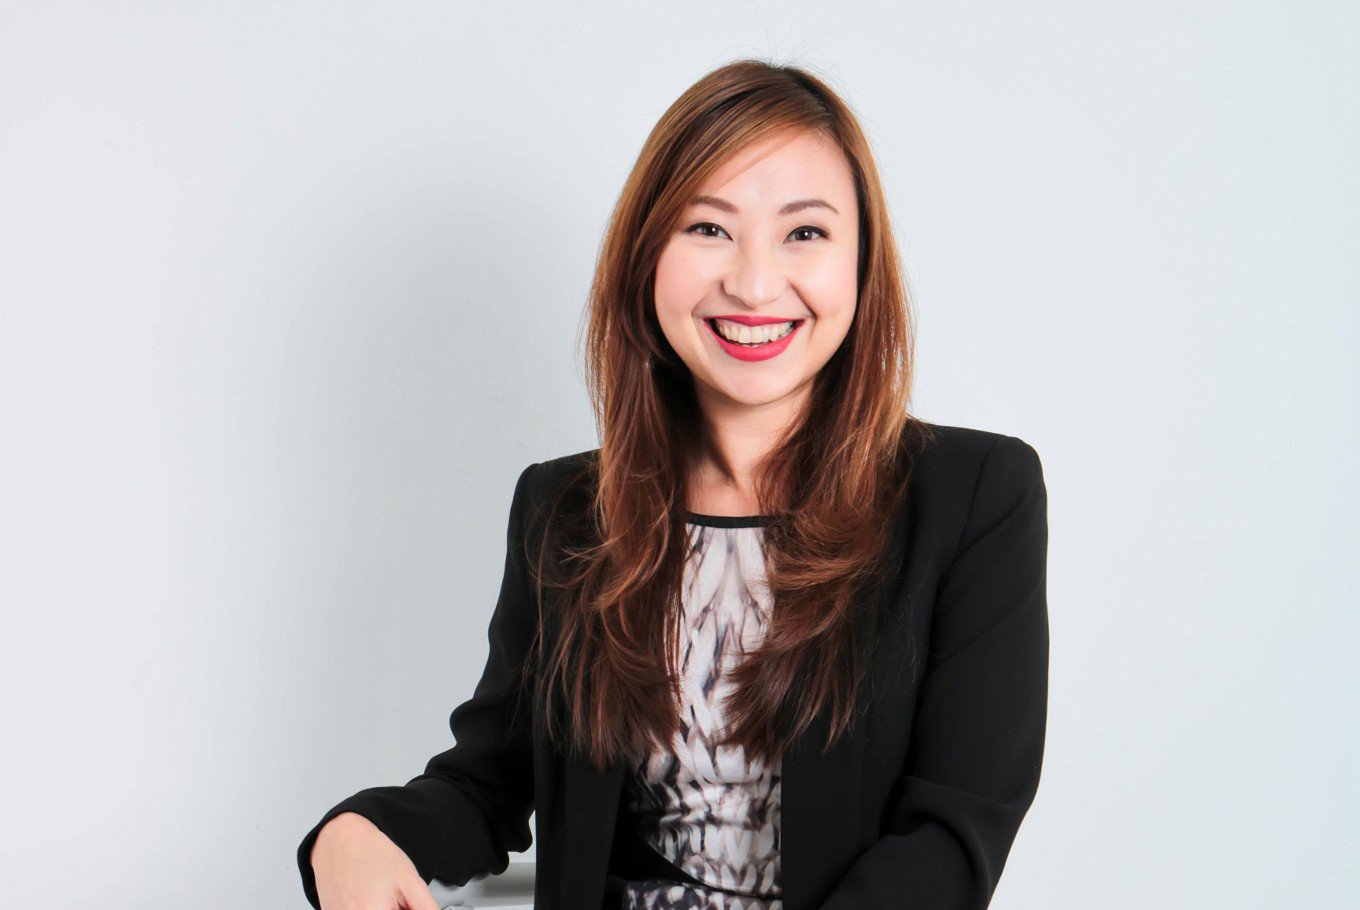 An exclusive interview with Logisly's Co-Founder and CEO, Roolin Njotosetiadi. She's one of few women that successfully building a logistics company